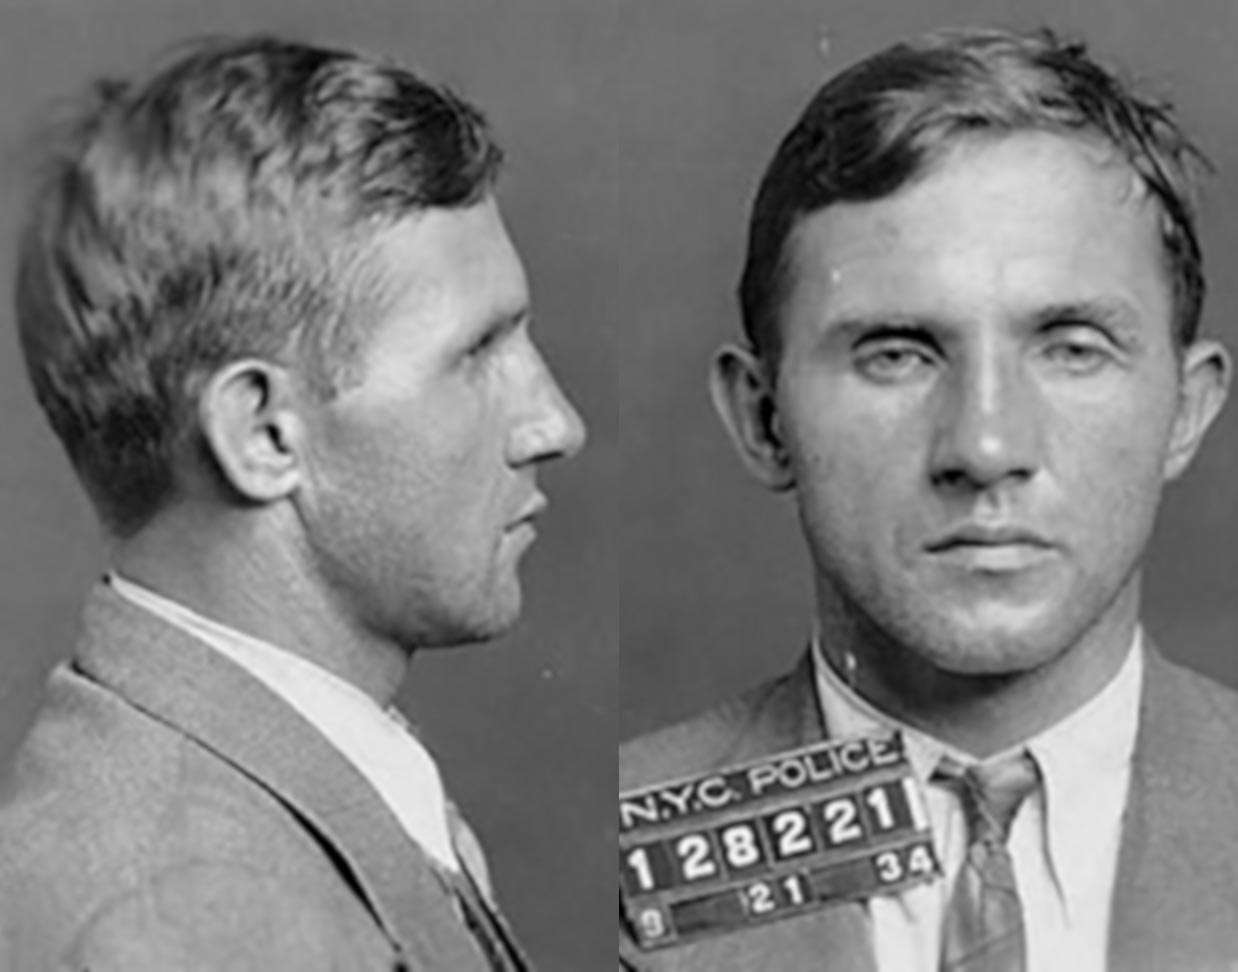 Bruno Richard Hauptmann was convicted of the abduction and murder of the 20-month-old son of Charles Lindbergh and Anne Morrow Lindbergh